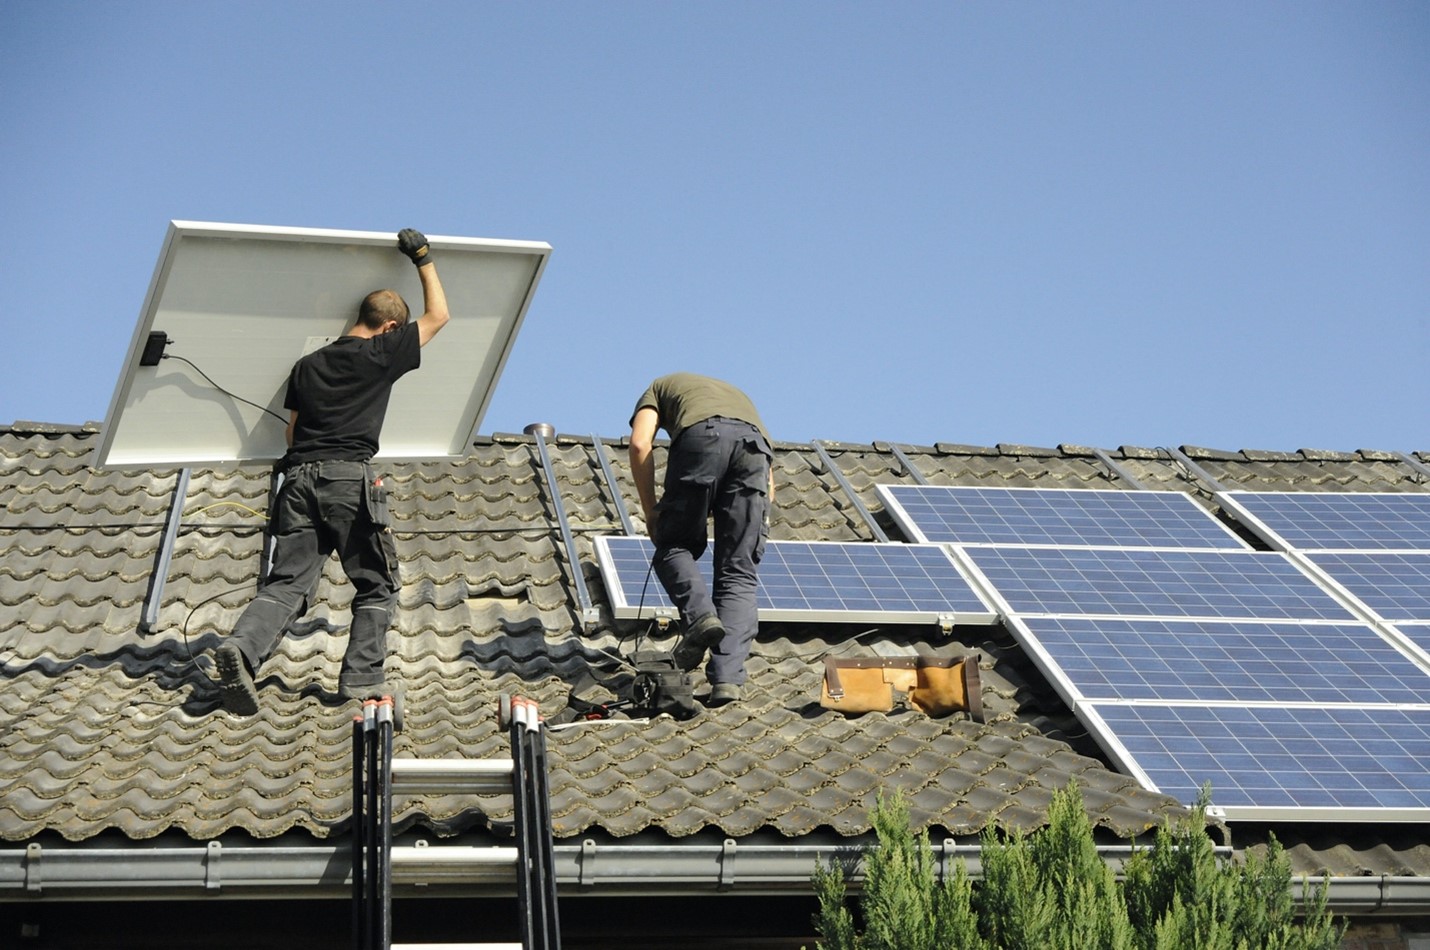 Two workers installing photovoltaic/solar panels on a tiled roof.